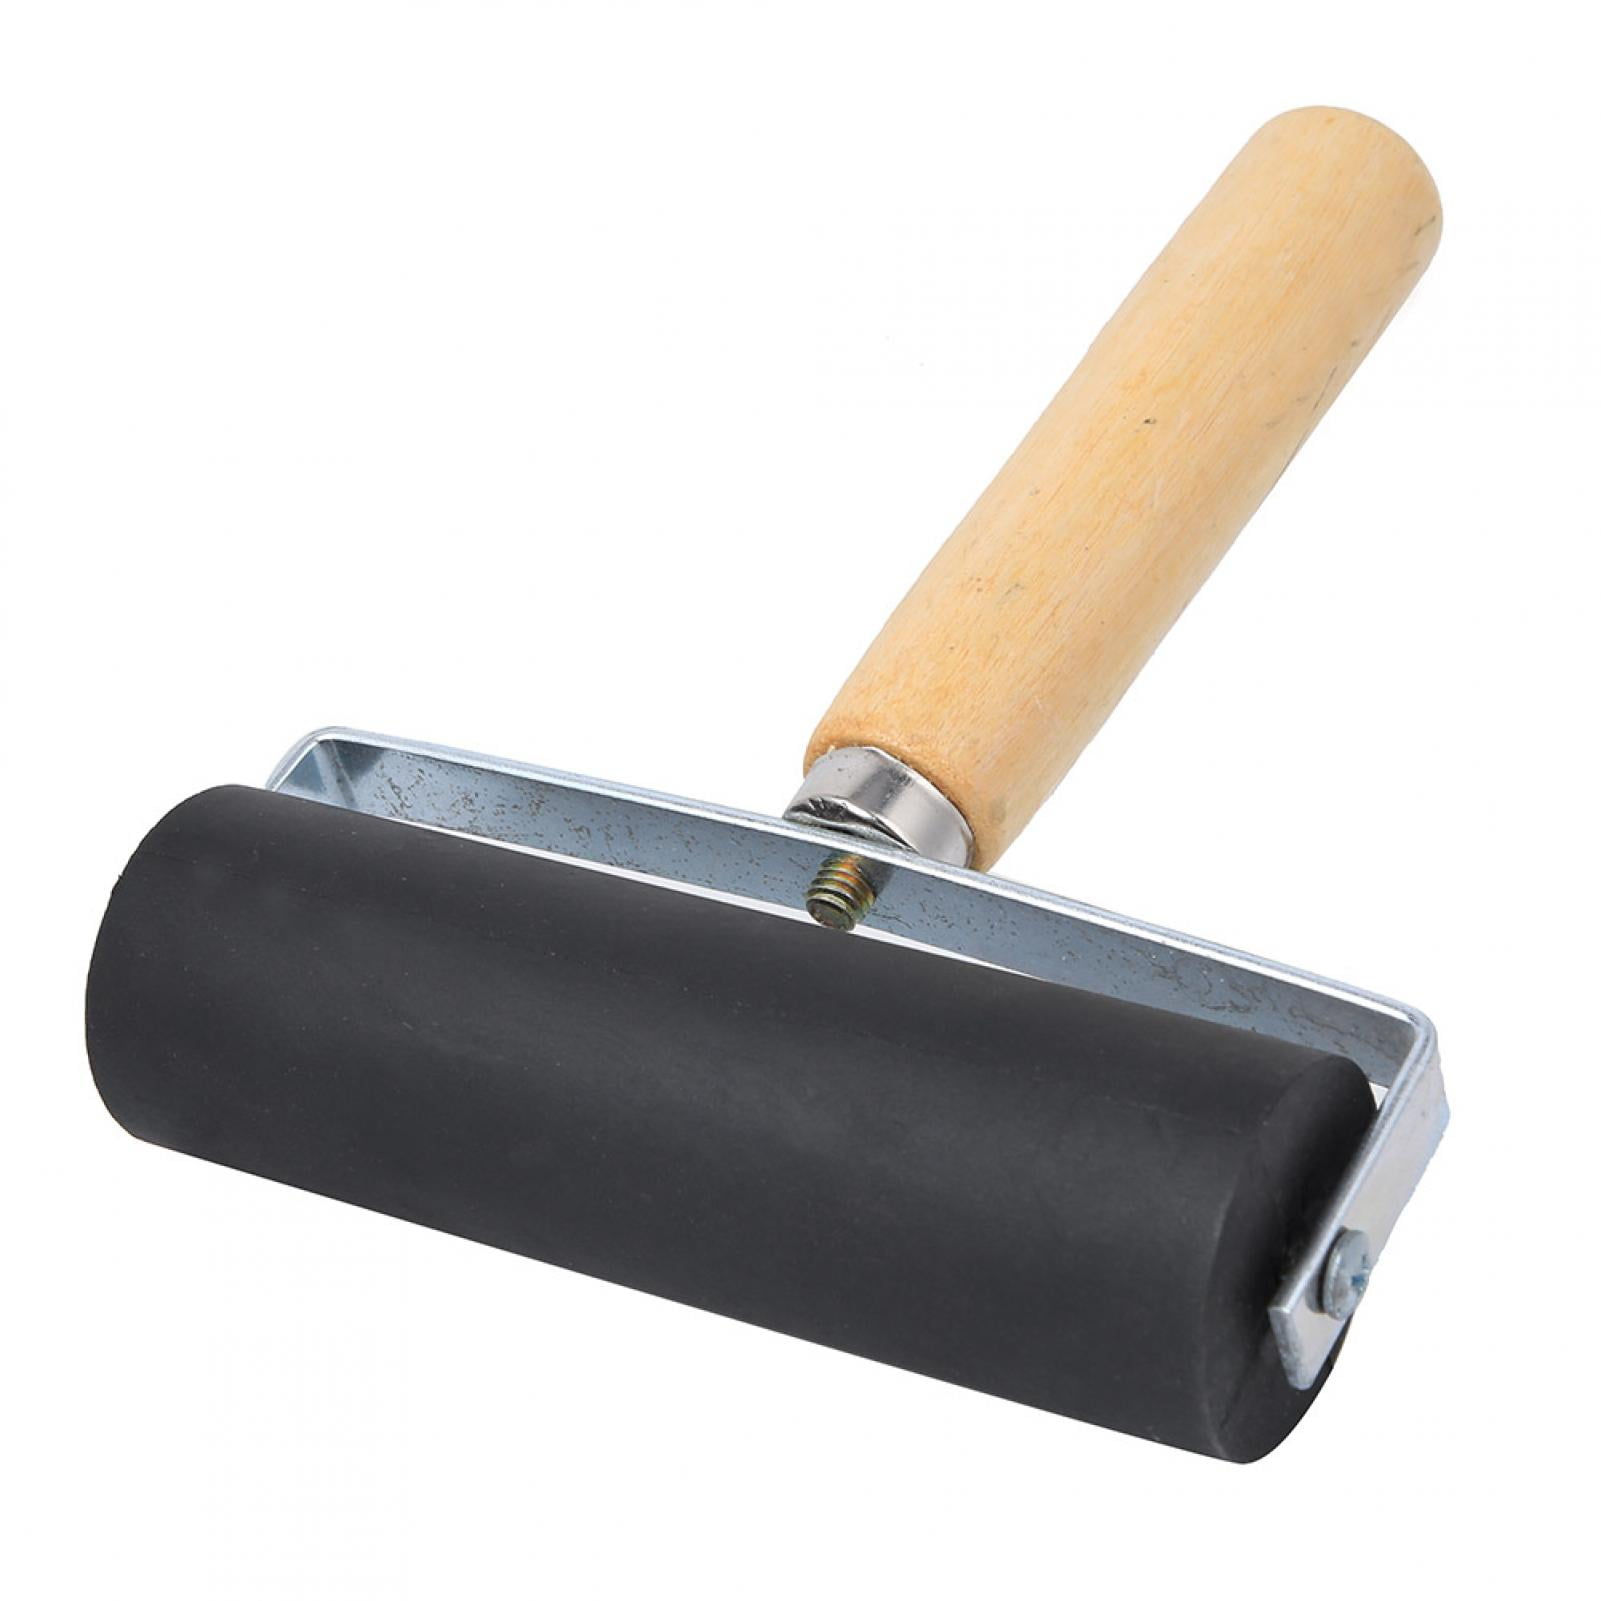 Black Bgfuni 2 PCS Rubber Brayer Roller Soft Ink Applicator for Printmaking Wallpaper Ink Paint Block Stamping and Arts Crafts,Anti Skid Construction Tools with Hard Rubber Drum 6/10cm Glue Roller